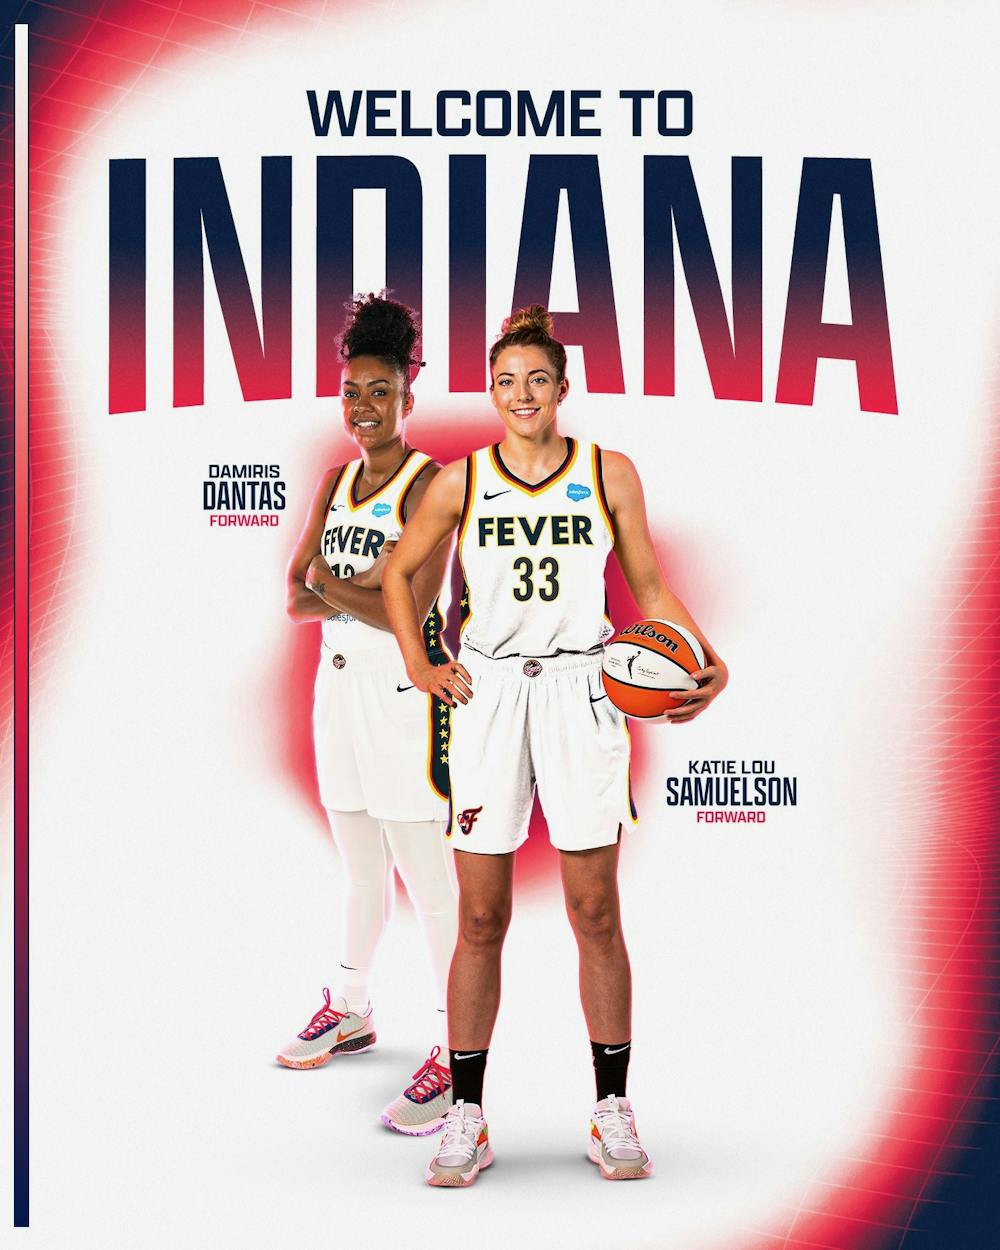 Graphic Courtesy of Indiana Fever Instagram page